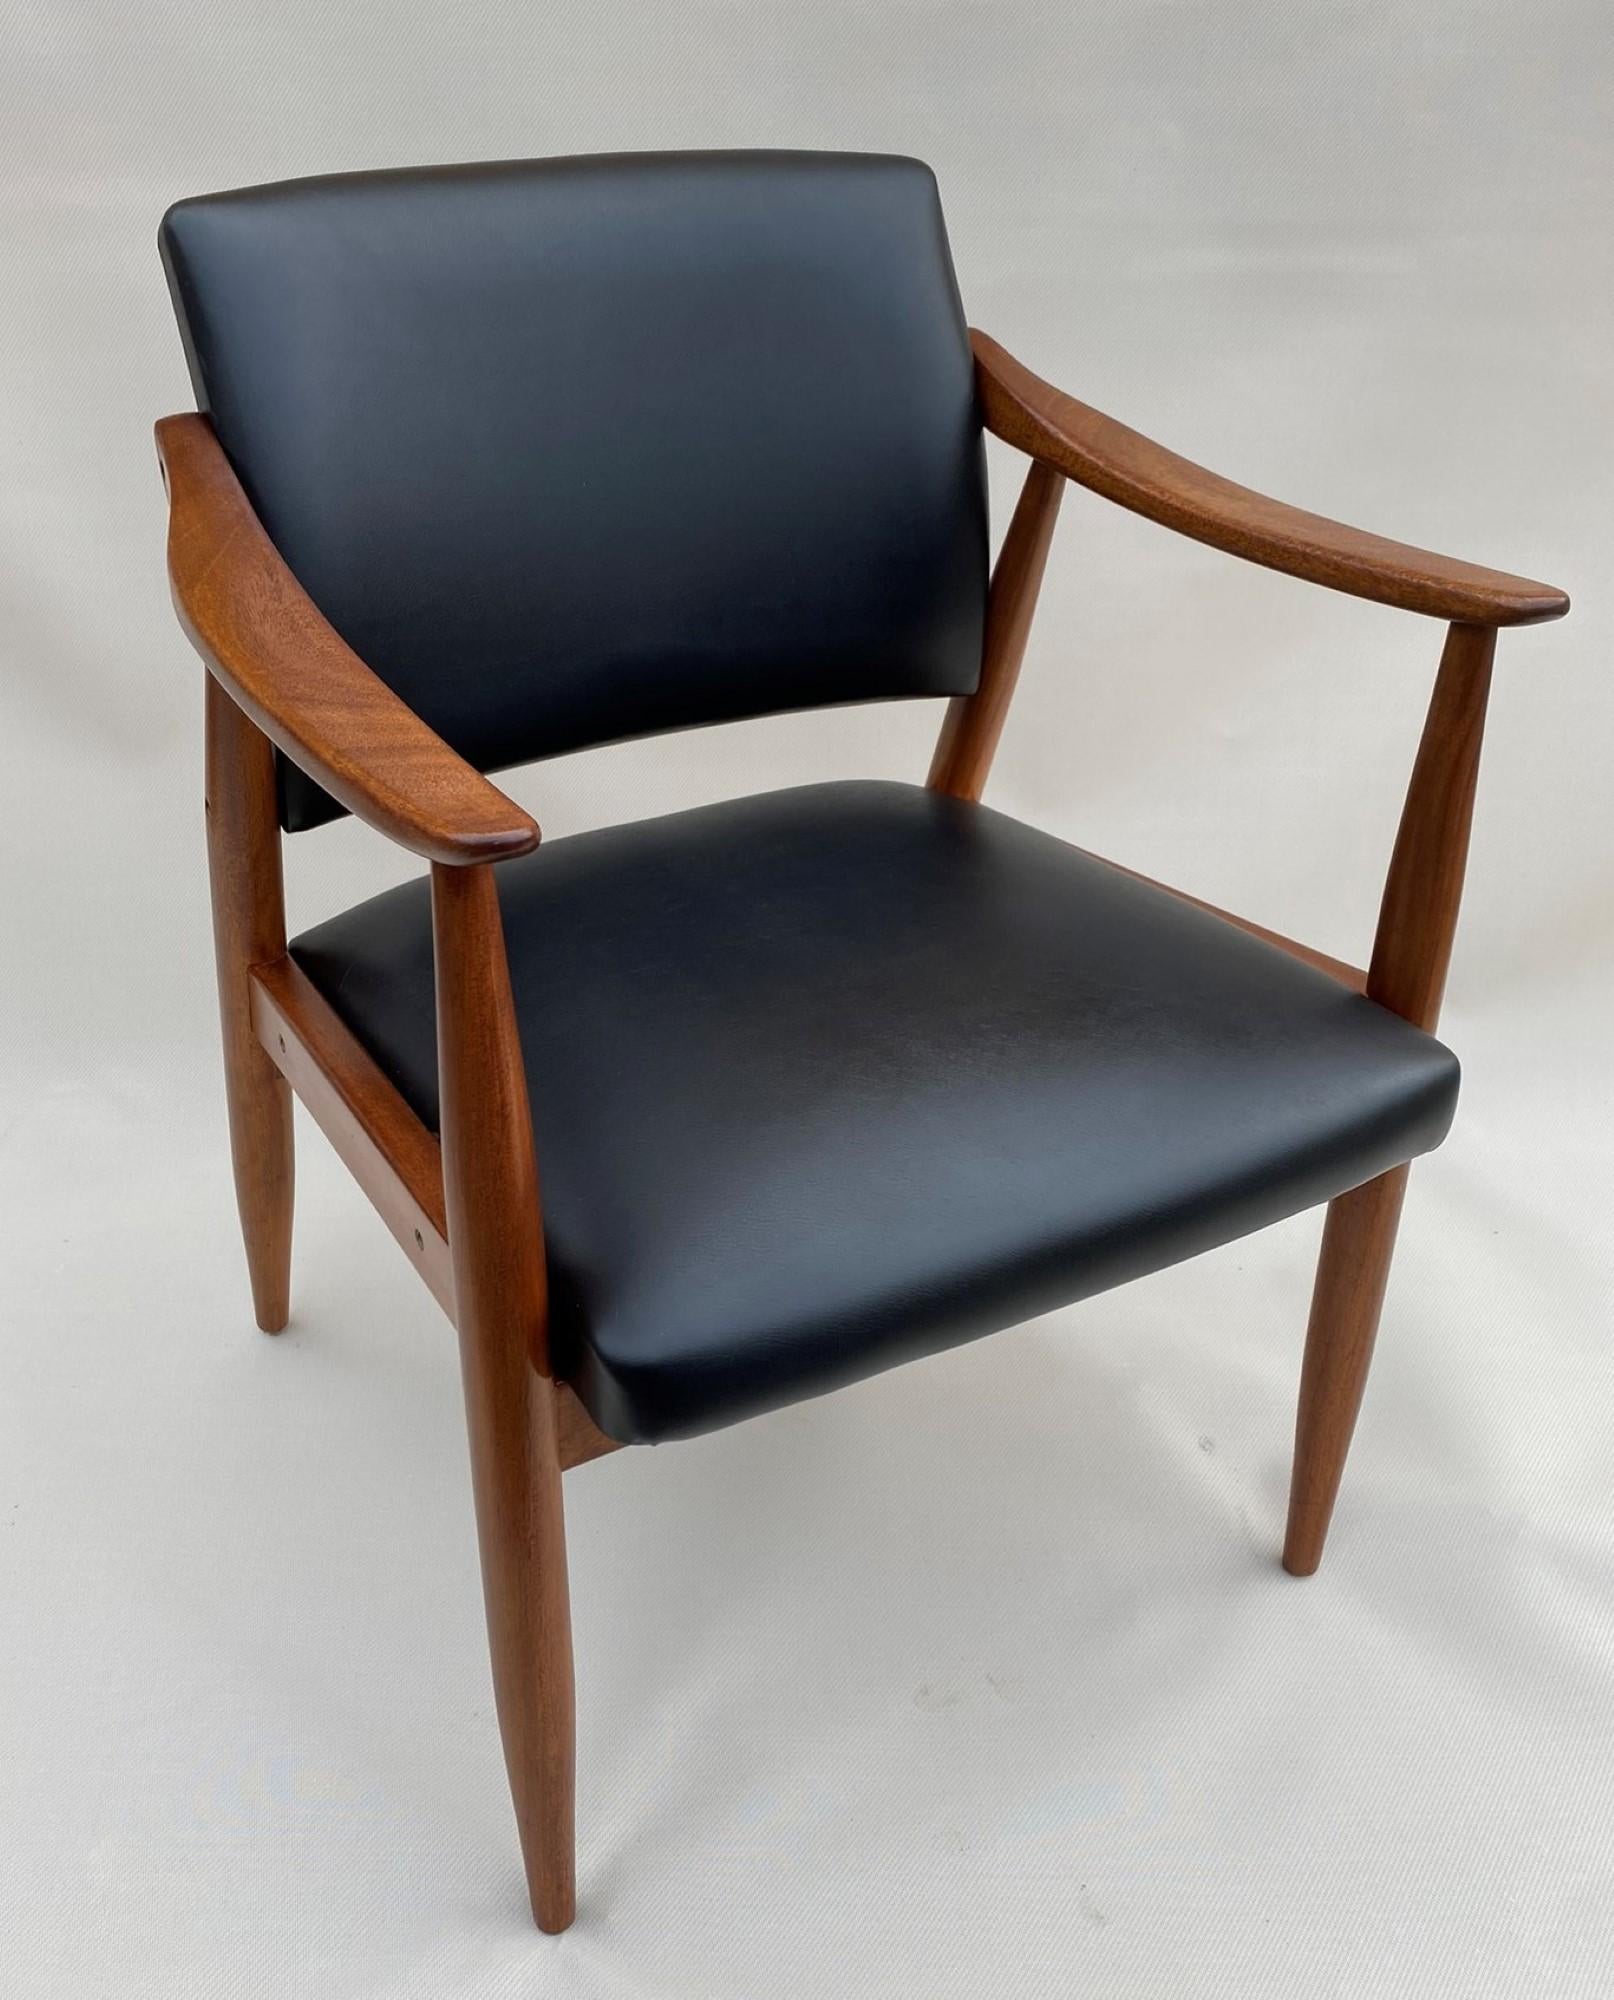 Midcentury teak armchair. Solid teak frame, black leatherette upholstered seat and back rest. Elegant tapered legs, and armrests.

Teak frame has been refinished.

Scandinavian, 1960s

Condition: Great condition.

Dimensions: Overall: 58 Cms